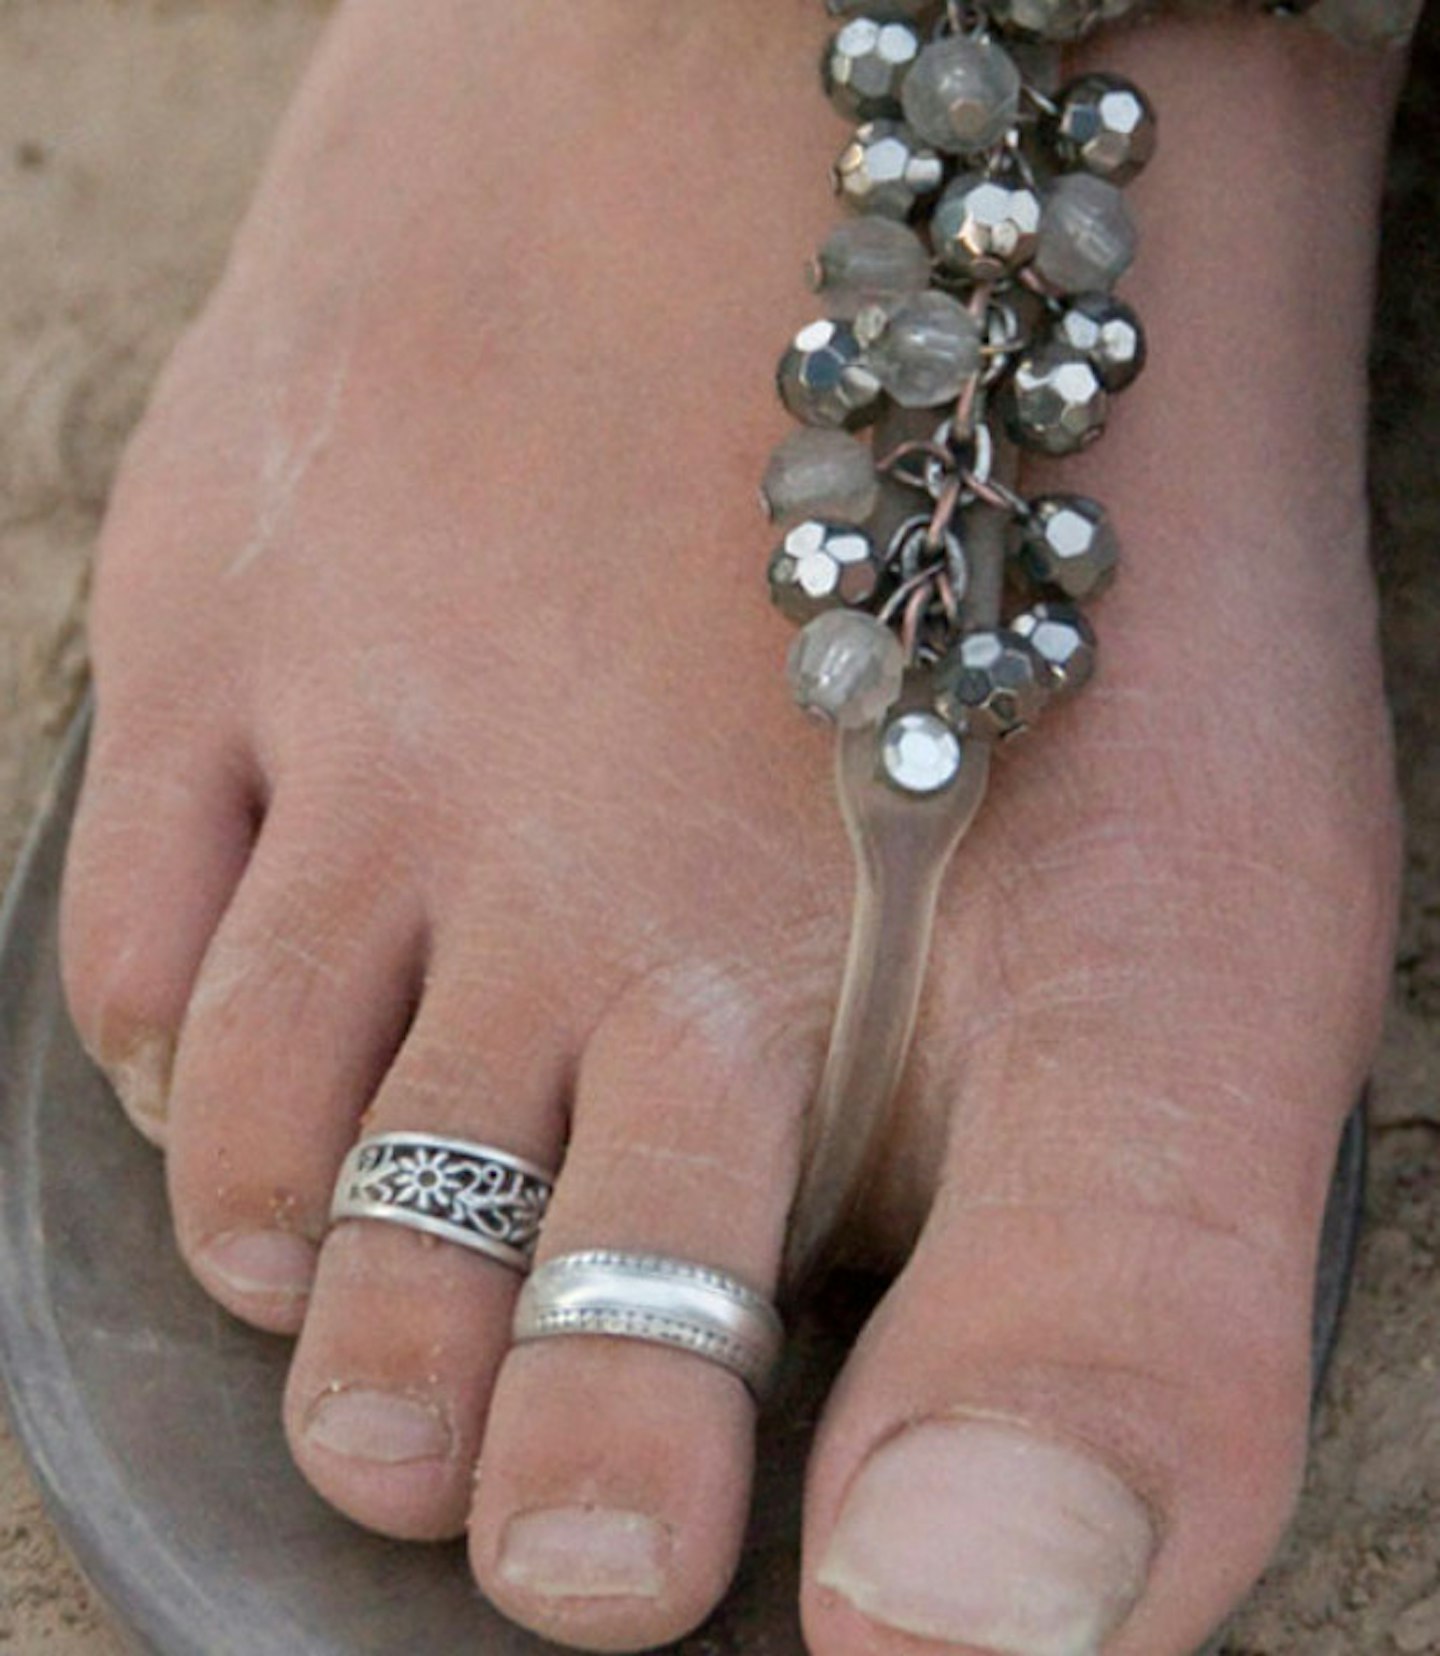 Snazzy toe rings